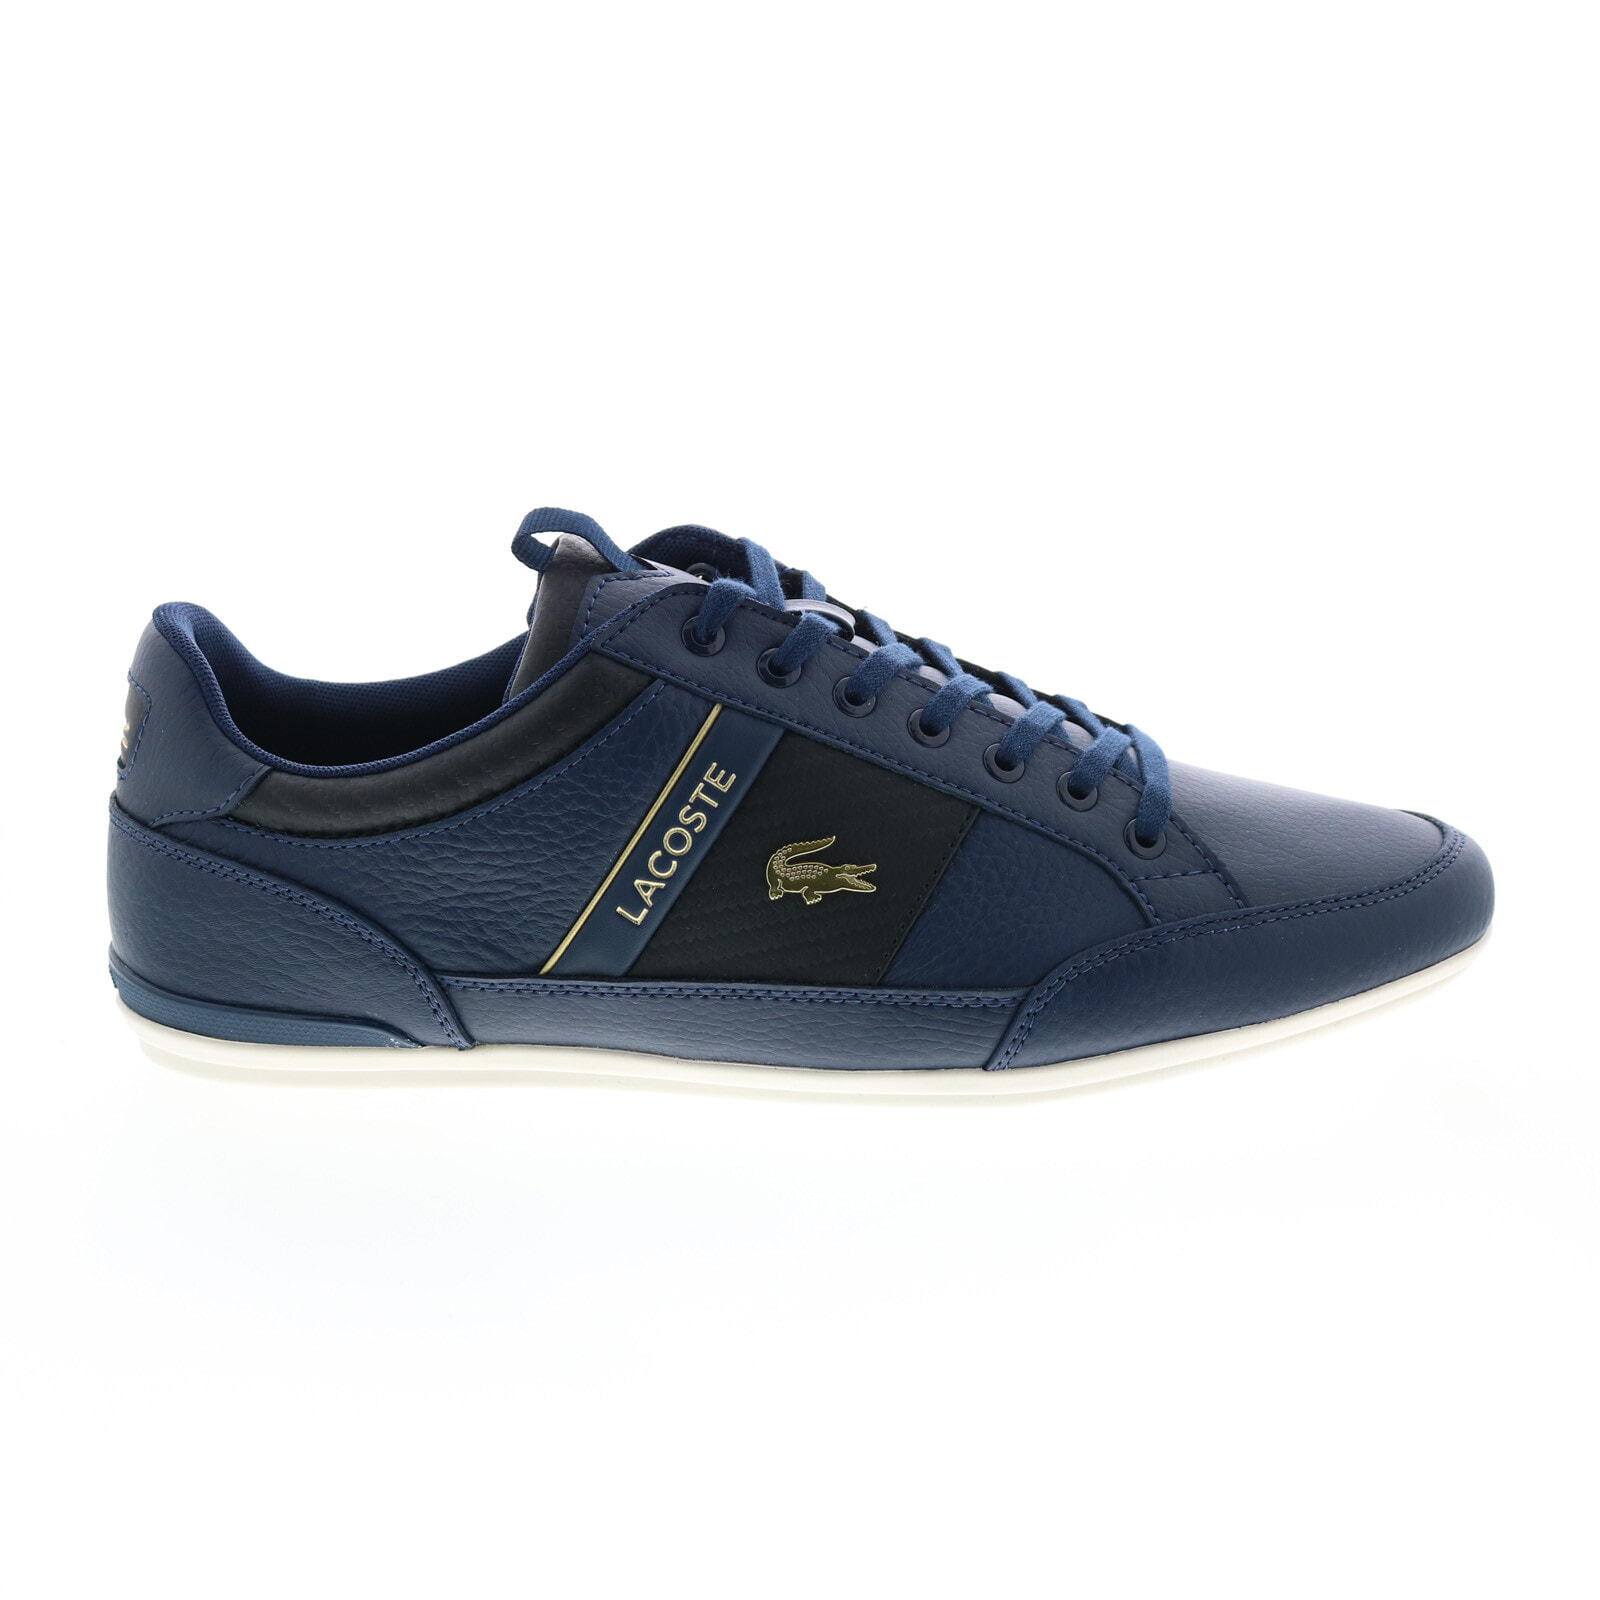 Lacoste Chaymon 0120 1 CMA Mens Blue Leather Lifestyle Sneakers Shoes